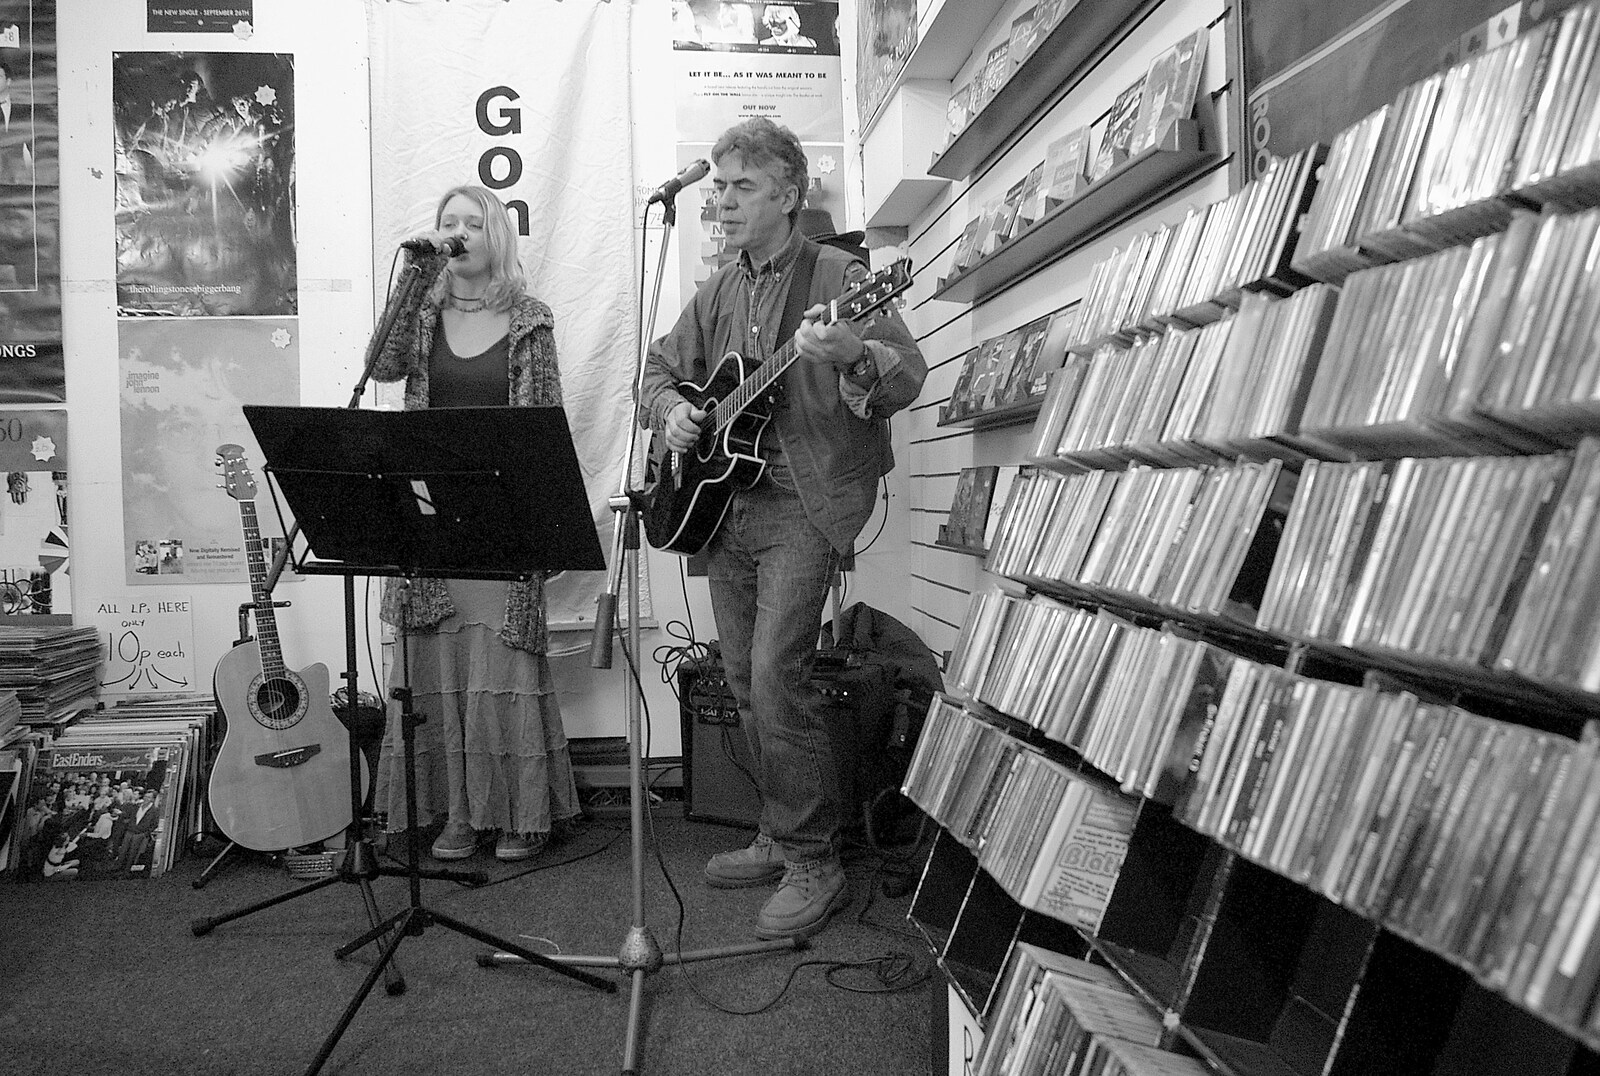 Closing Down: Viva La Revolution Records, Diss, Norfolk - 21st January 2006: On Saturday afternoon, Geoff Sharkey is playing